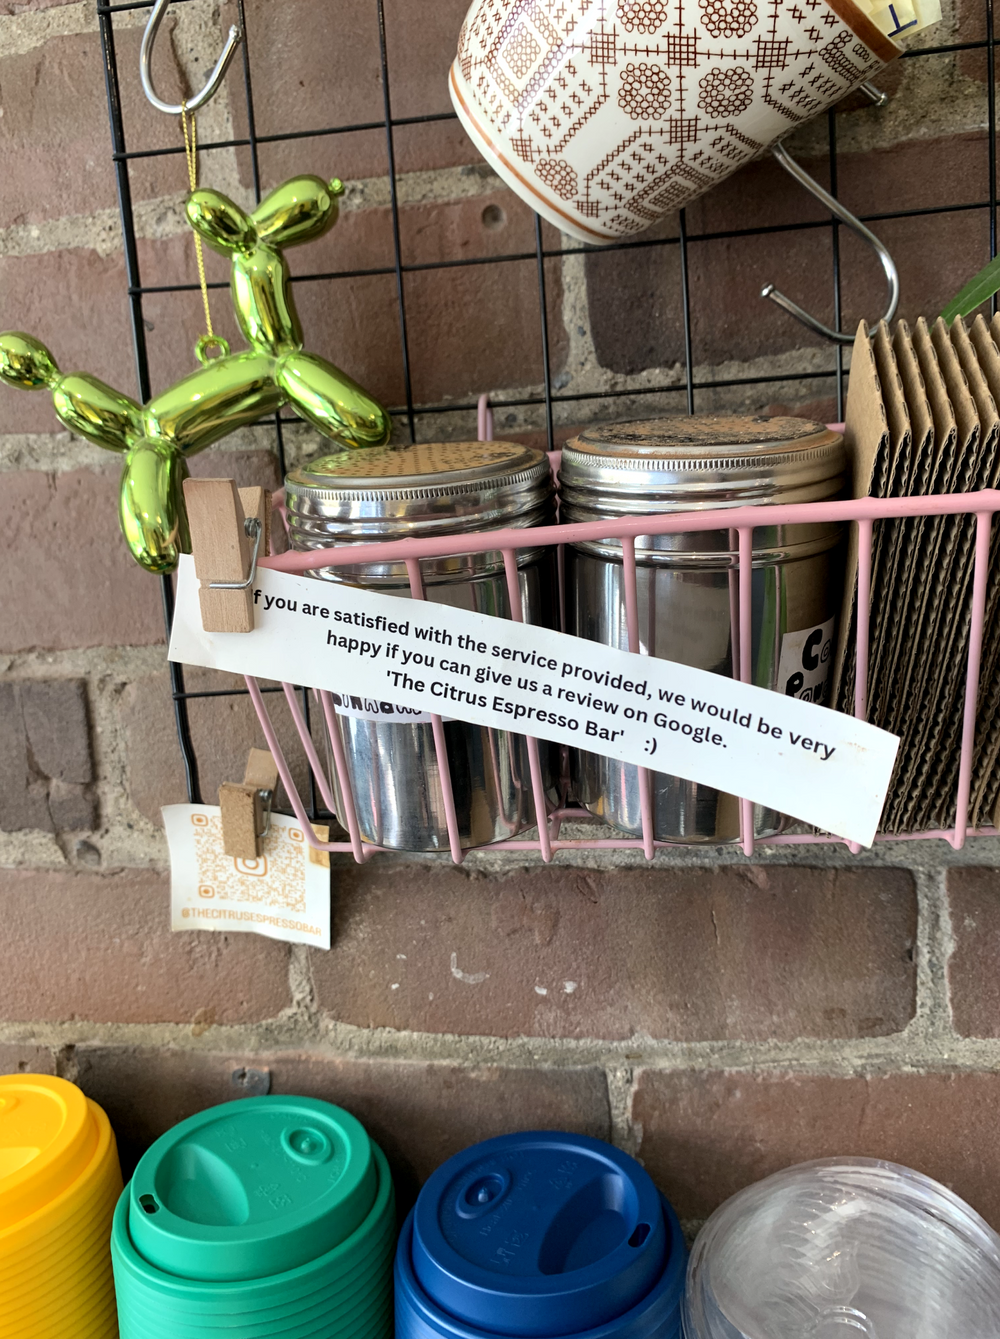 sign in cafe asking customers to leave a review on Google